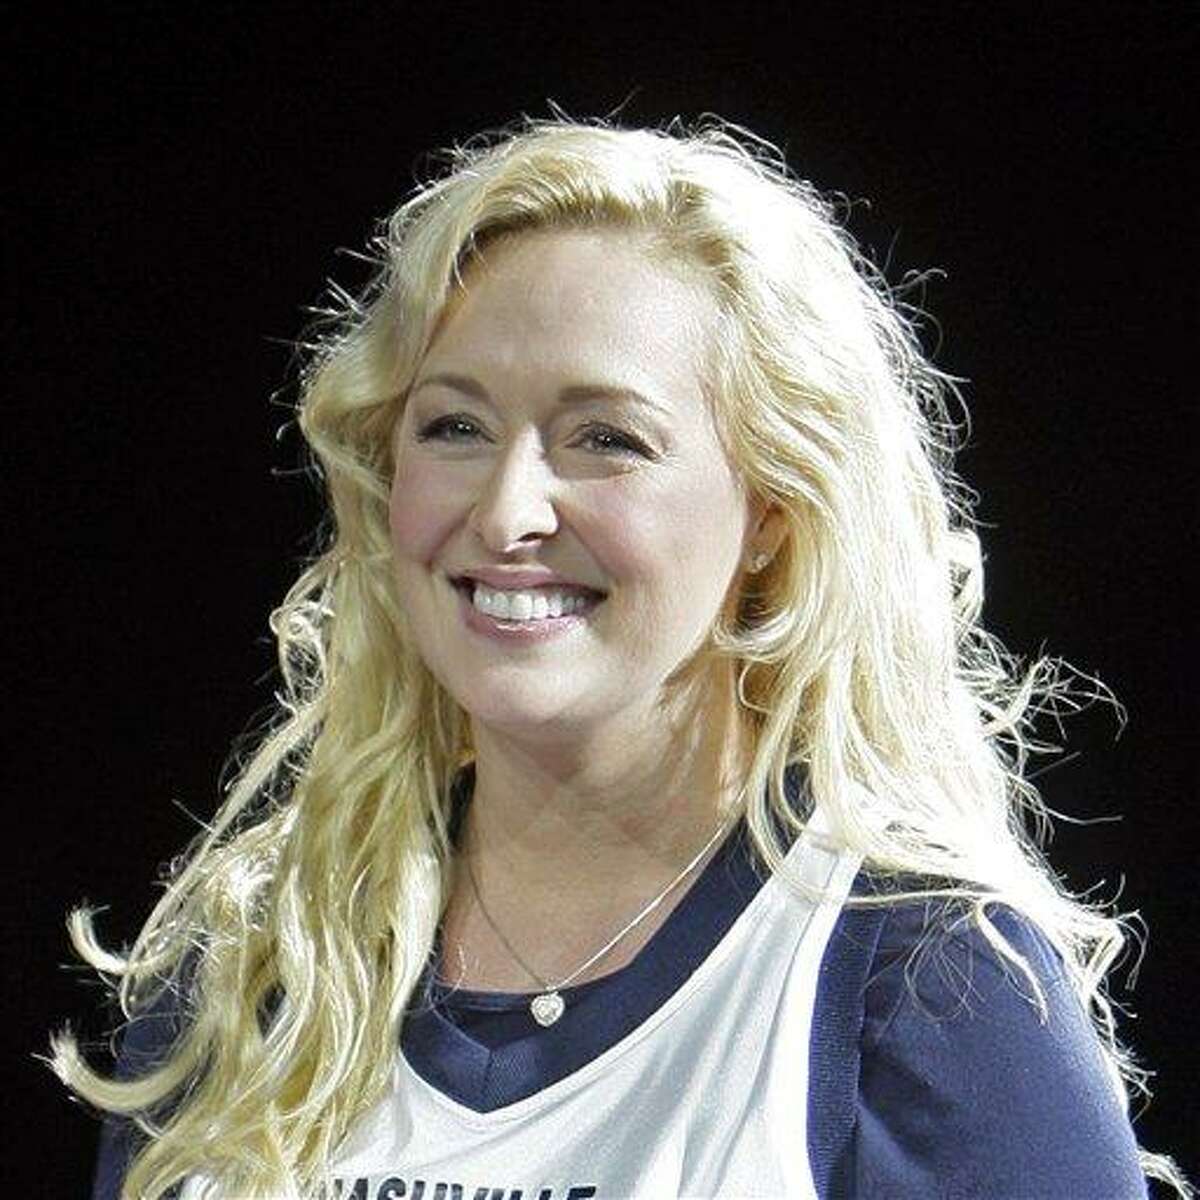 FILE - In this Nov. 14, 2008 file photo, Country singer Mindy McCready performs, in Nashville, Tenn. McCready, who hit the top of the country charts before personal problems sidetracked her career, died Sunday, Feb. 17, 2013. She was 37. (AP Photo/Mark Humphrey, File)